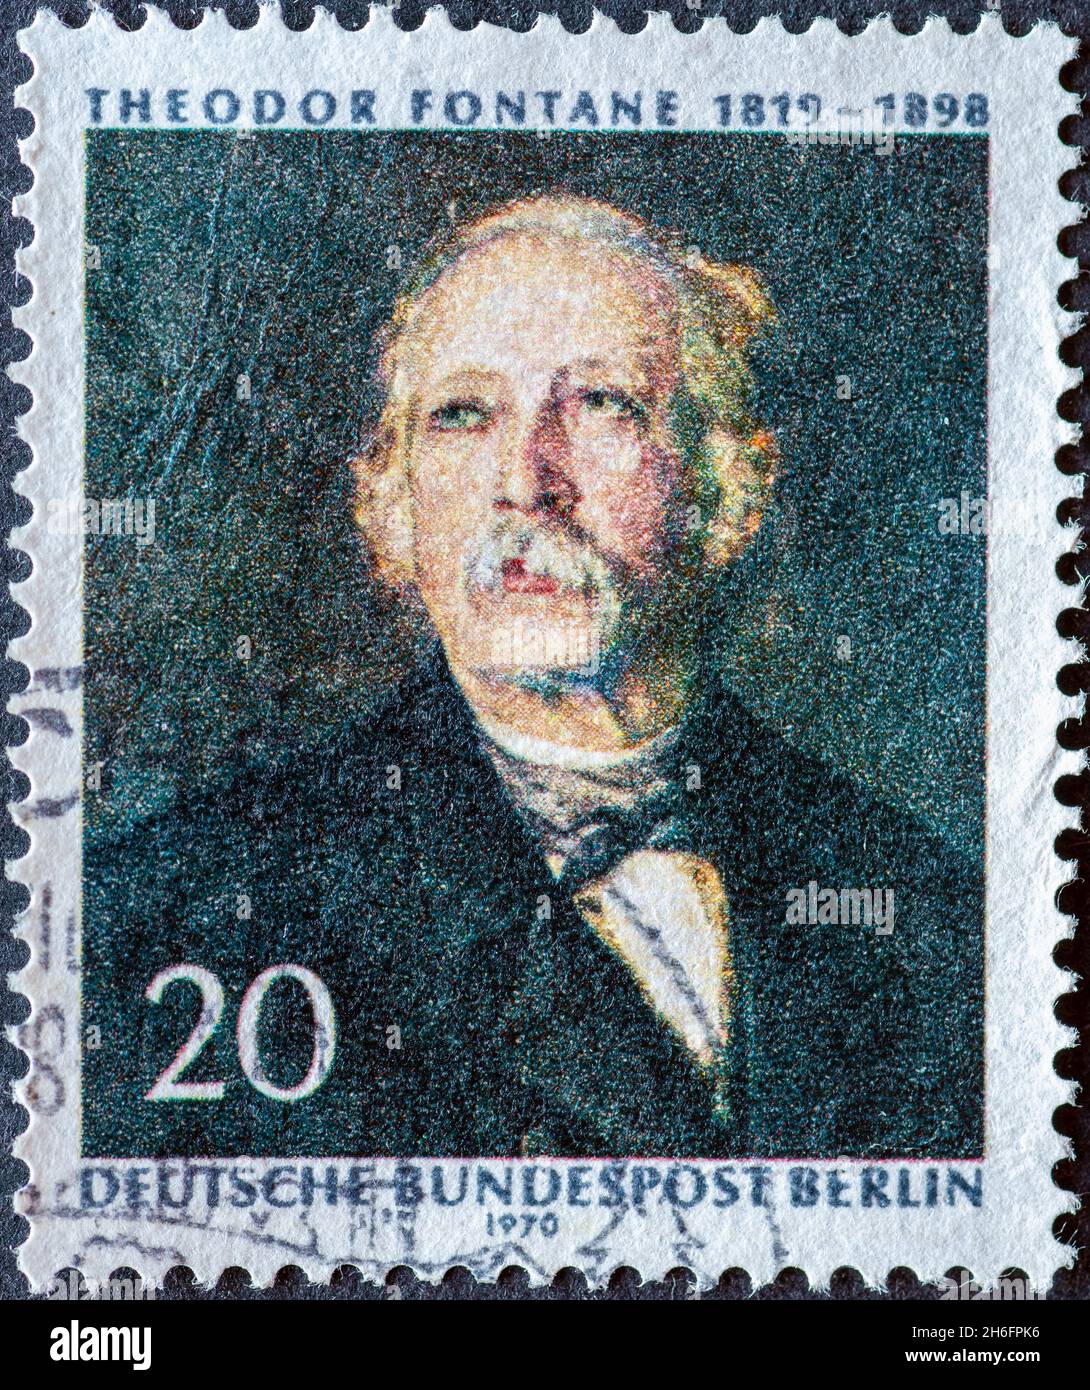 GERMANY, Berlin - CIRCA 1970: a postage stamp from Germany, Berlin showing a portrait of the poet, writer, journalist and critic Theodor Fontane 1819 Stock Photo